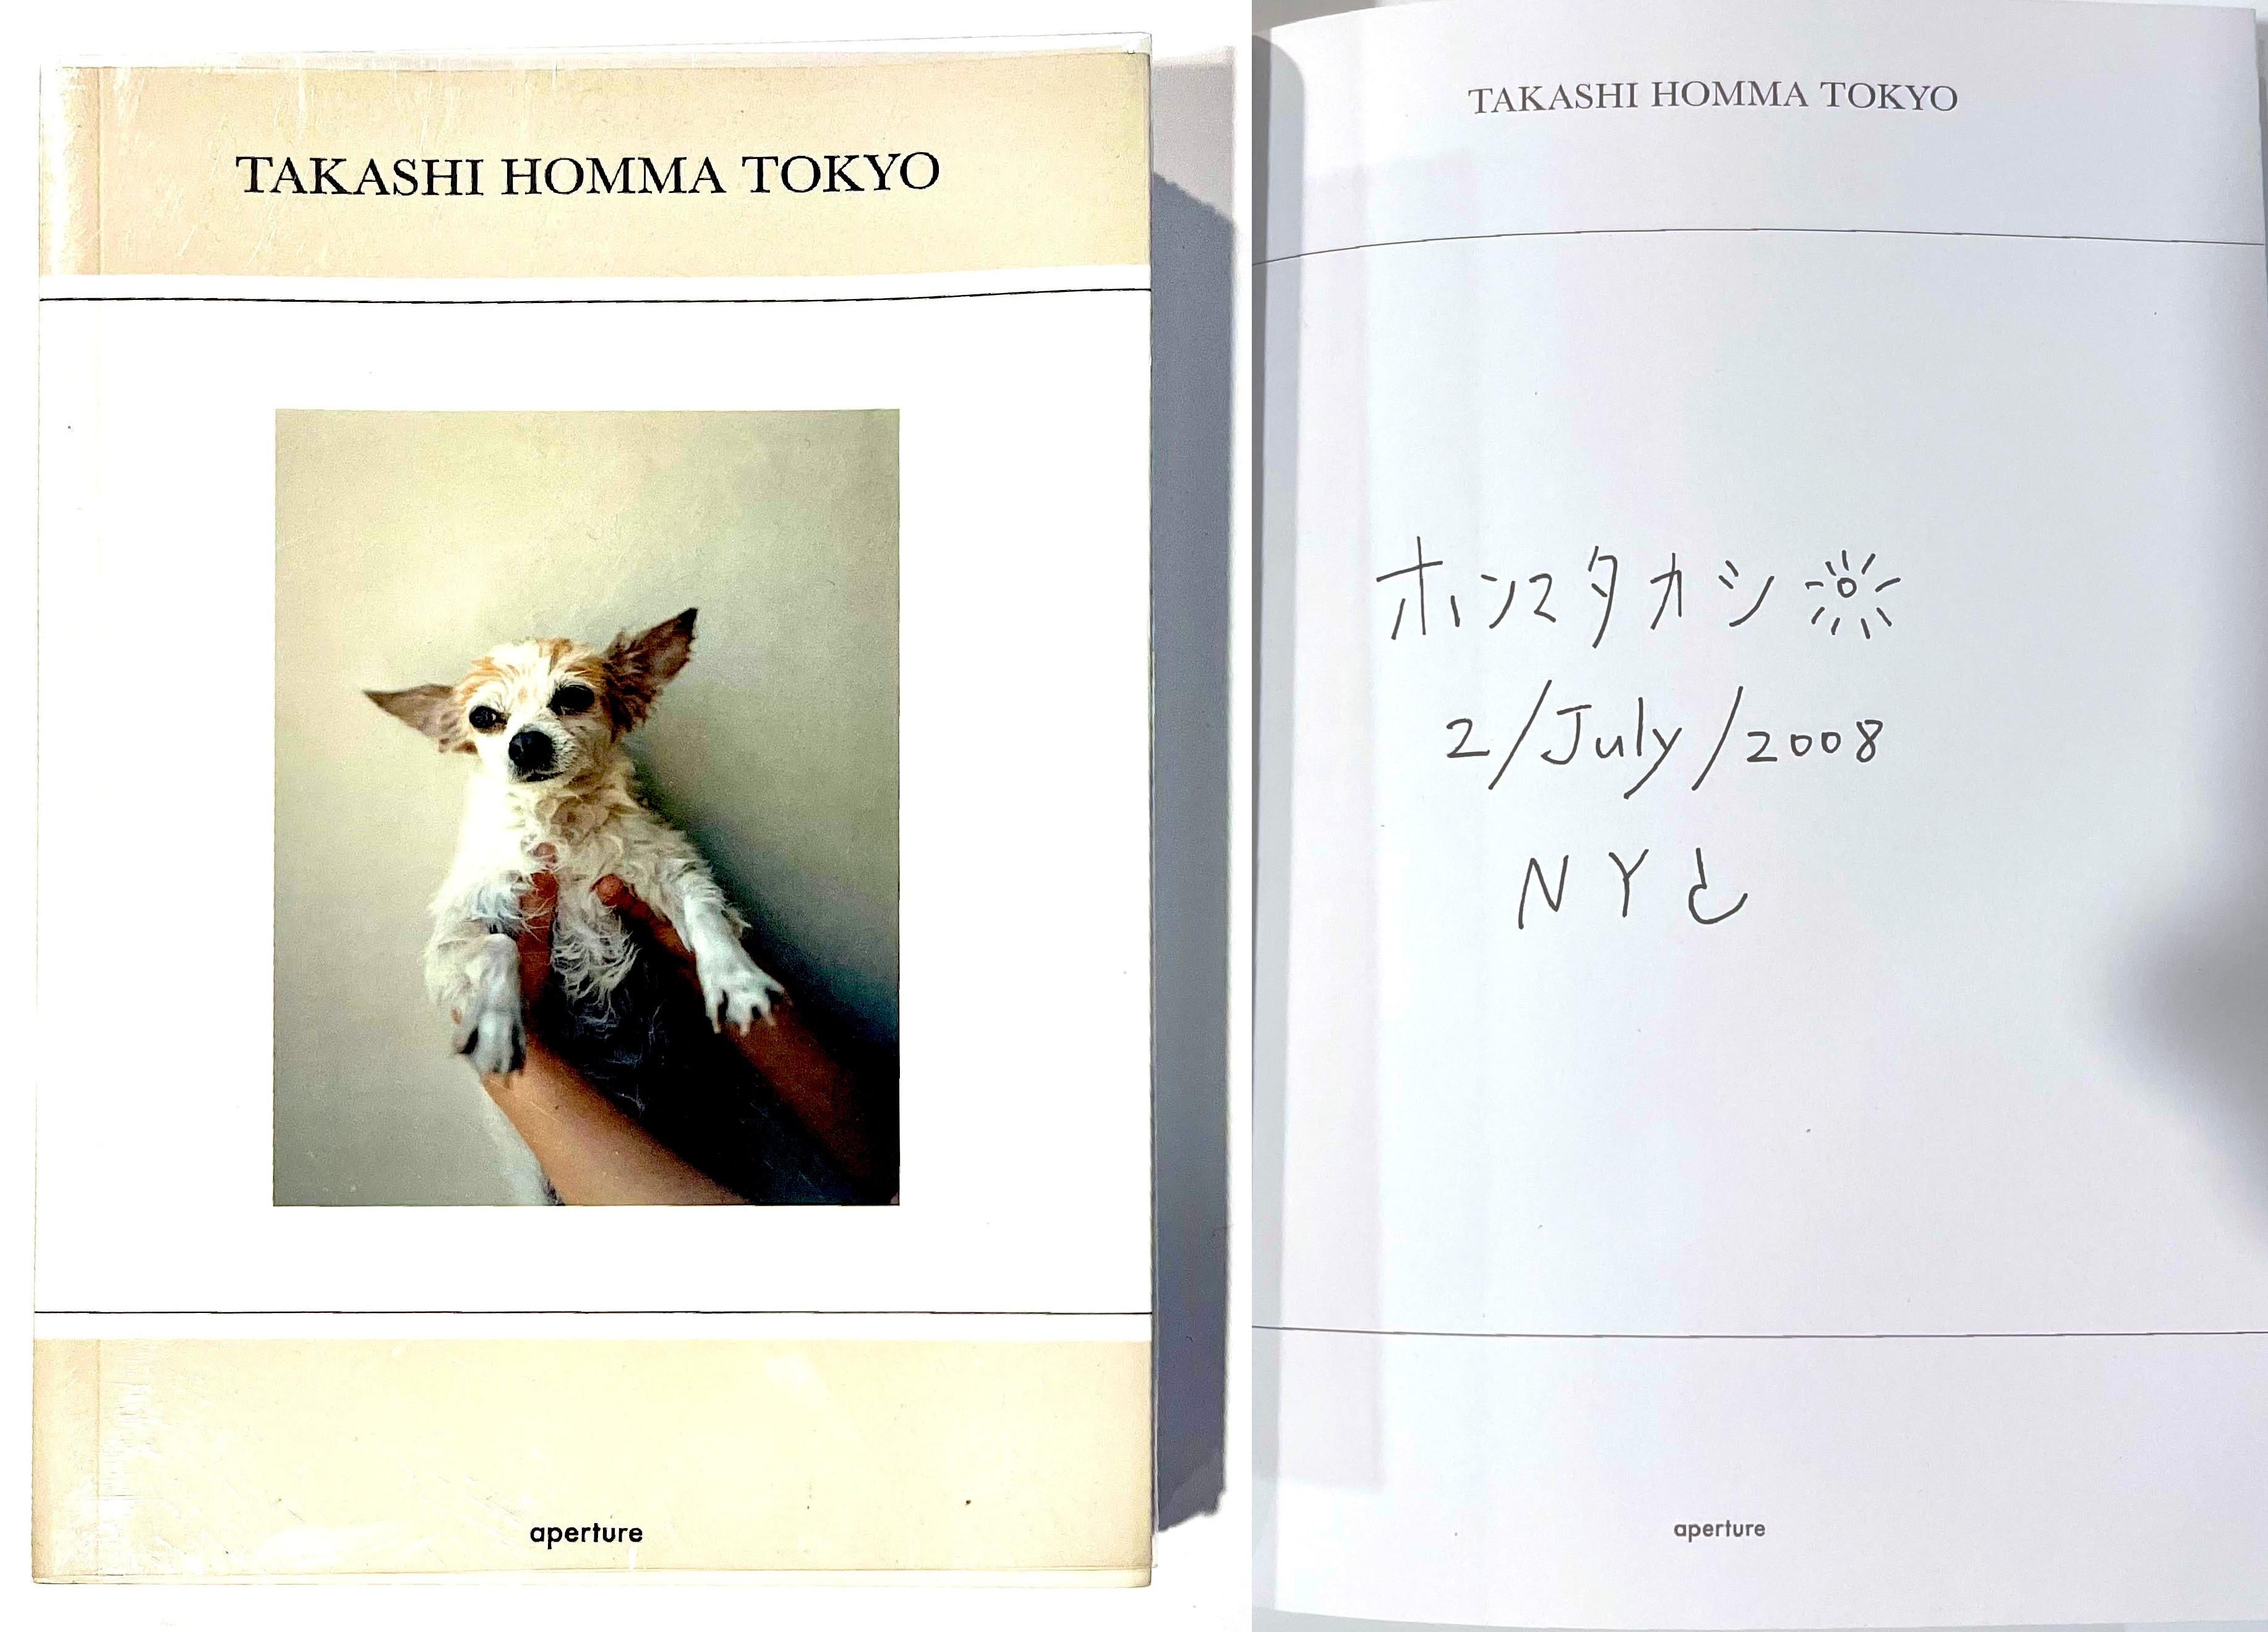 Takashi Homma Tokyo (hand signed, inscribed in Japanese and dated by Takashi Homma), 2008
Softback monograph with dust jacket, roughcut and deckled edges (hand signed, inscribed and dated by Takashi Homma)
Boldy signed, inscribed and dated in black